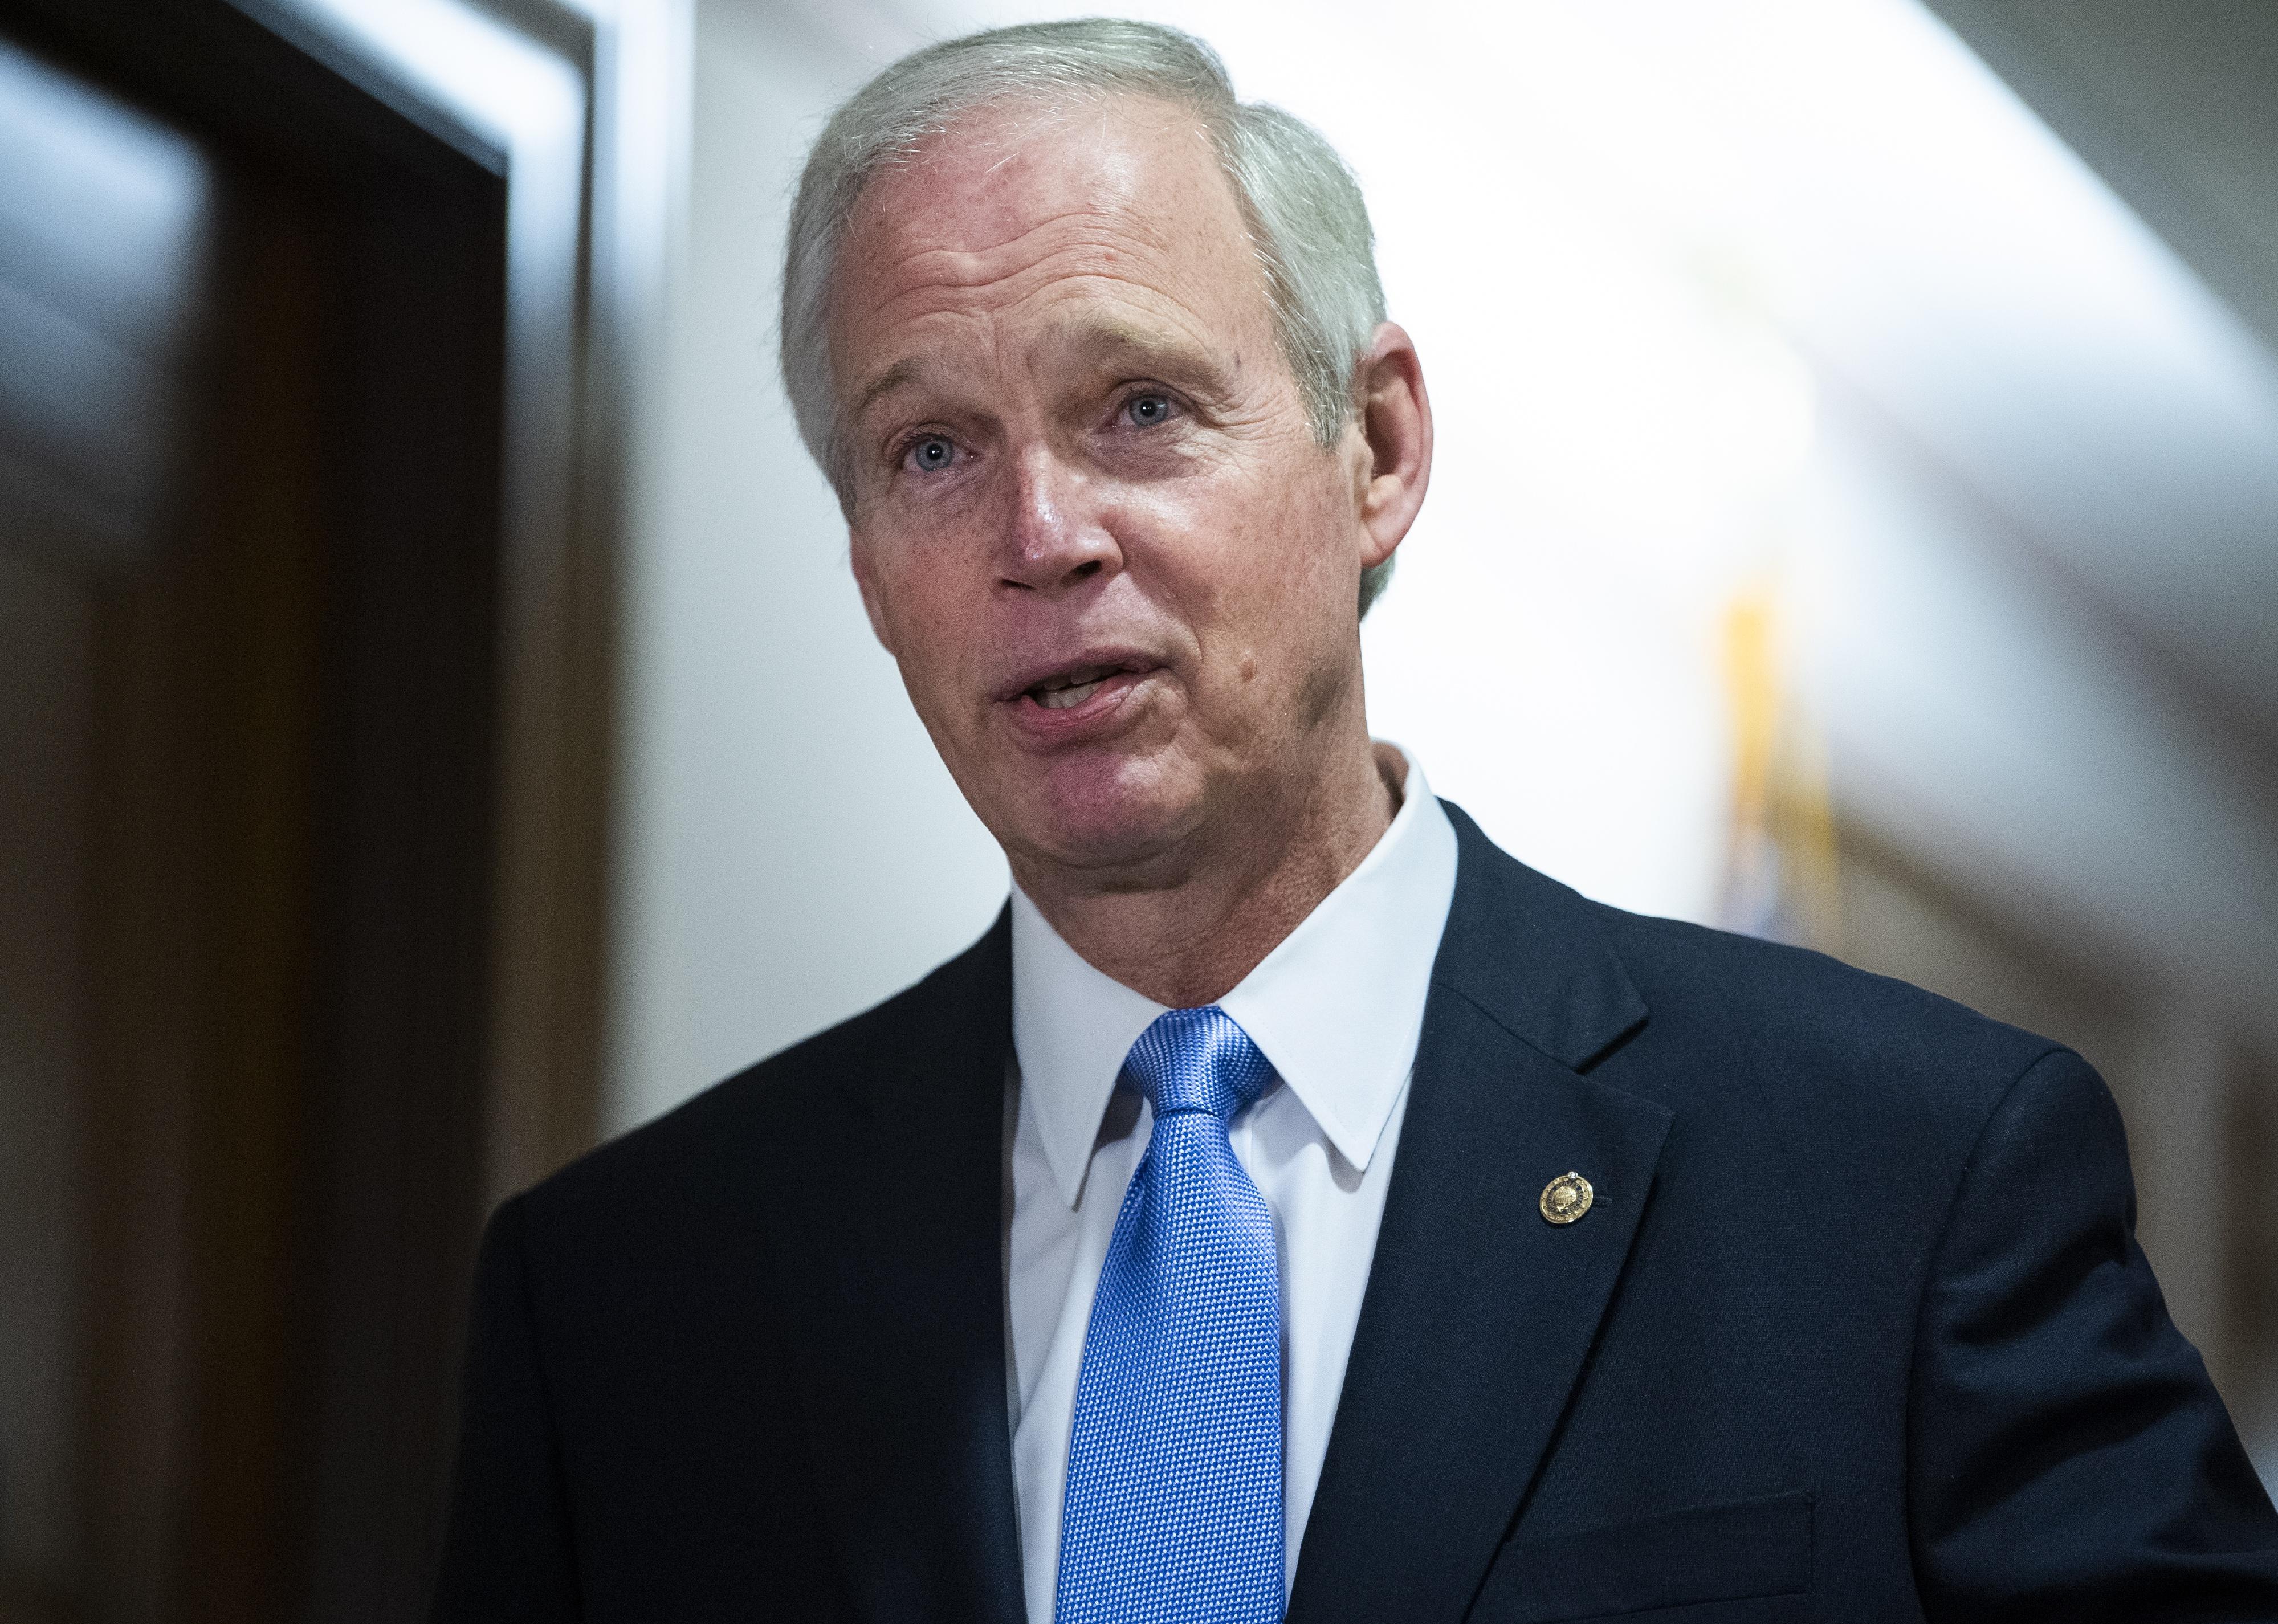 Ron Johnson in a suit and blue tie.